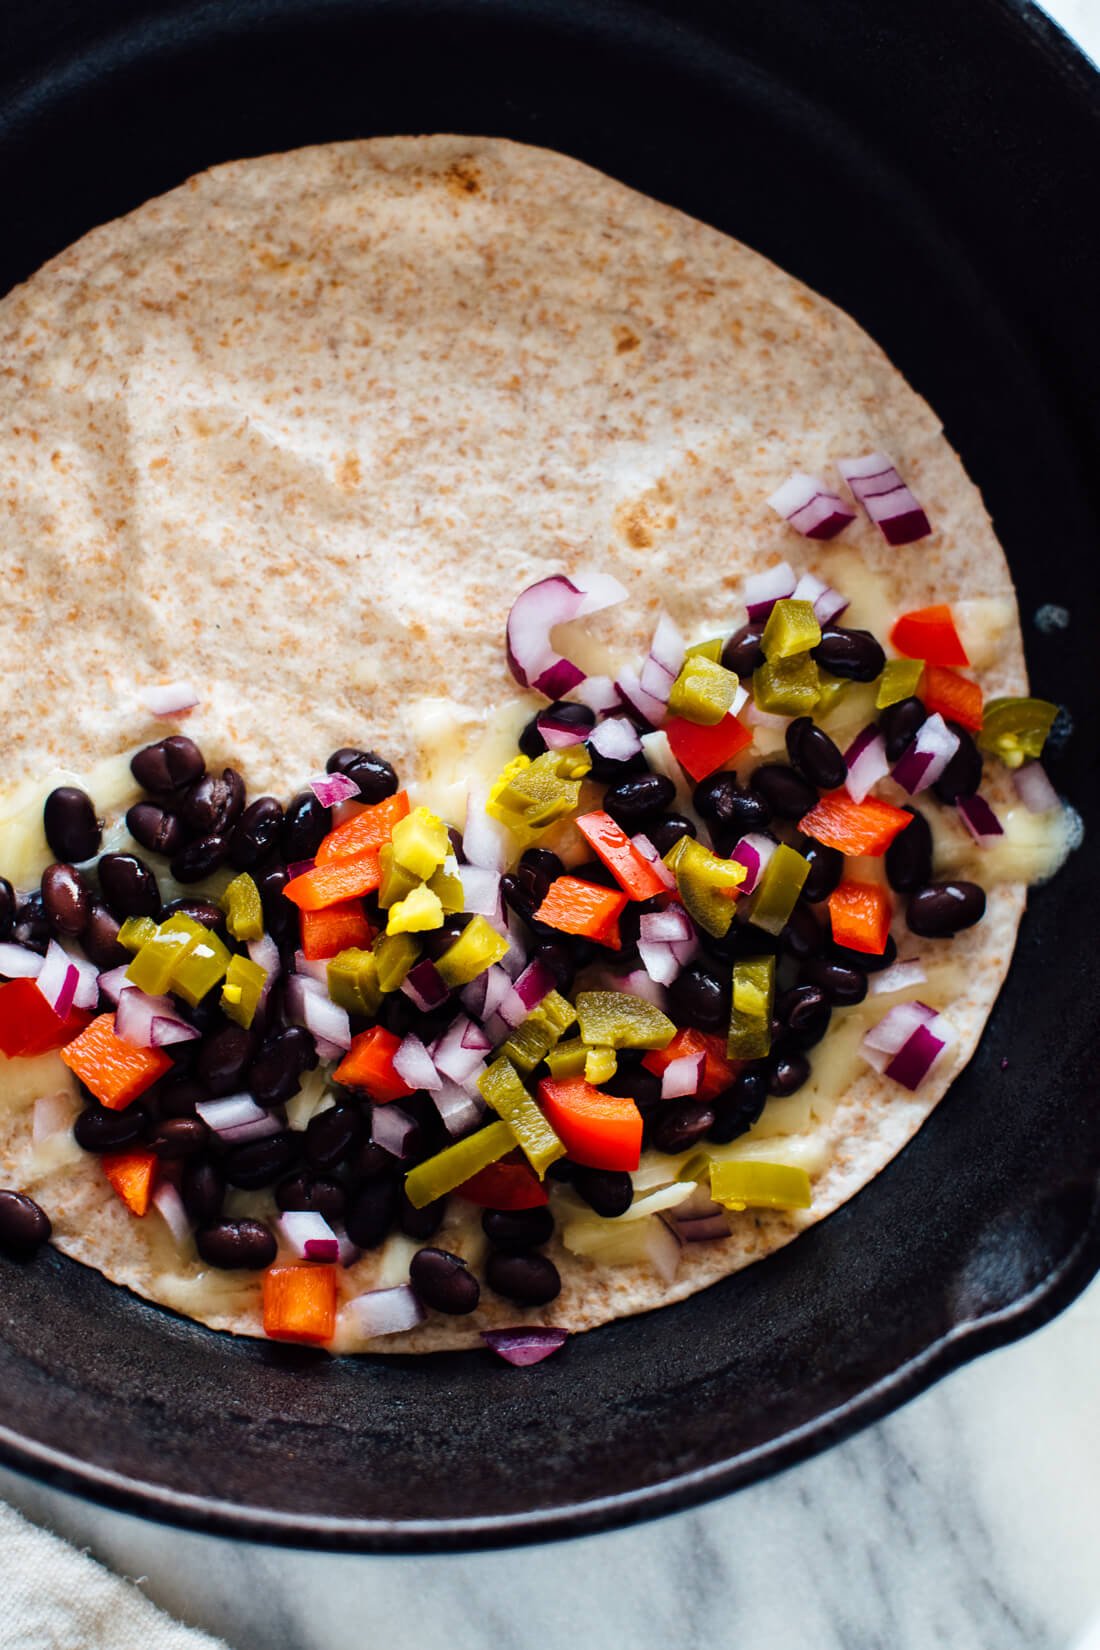 17-Minute Quesadillas Recipe - Cookie and Kate